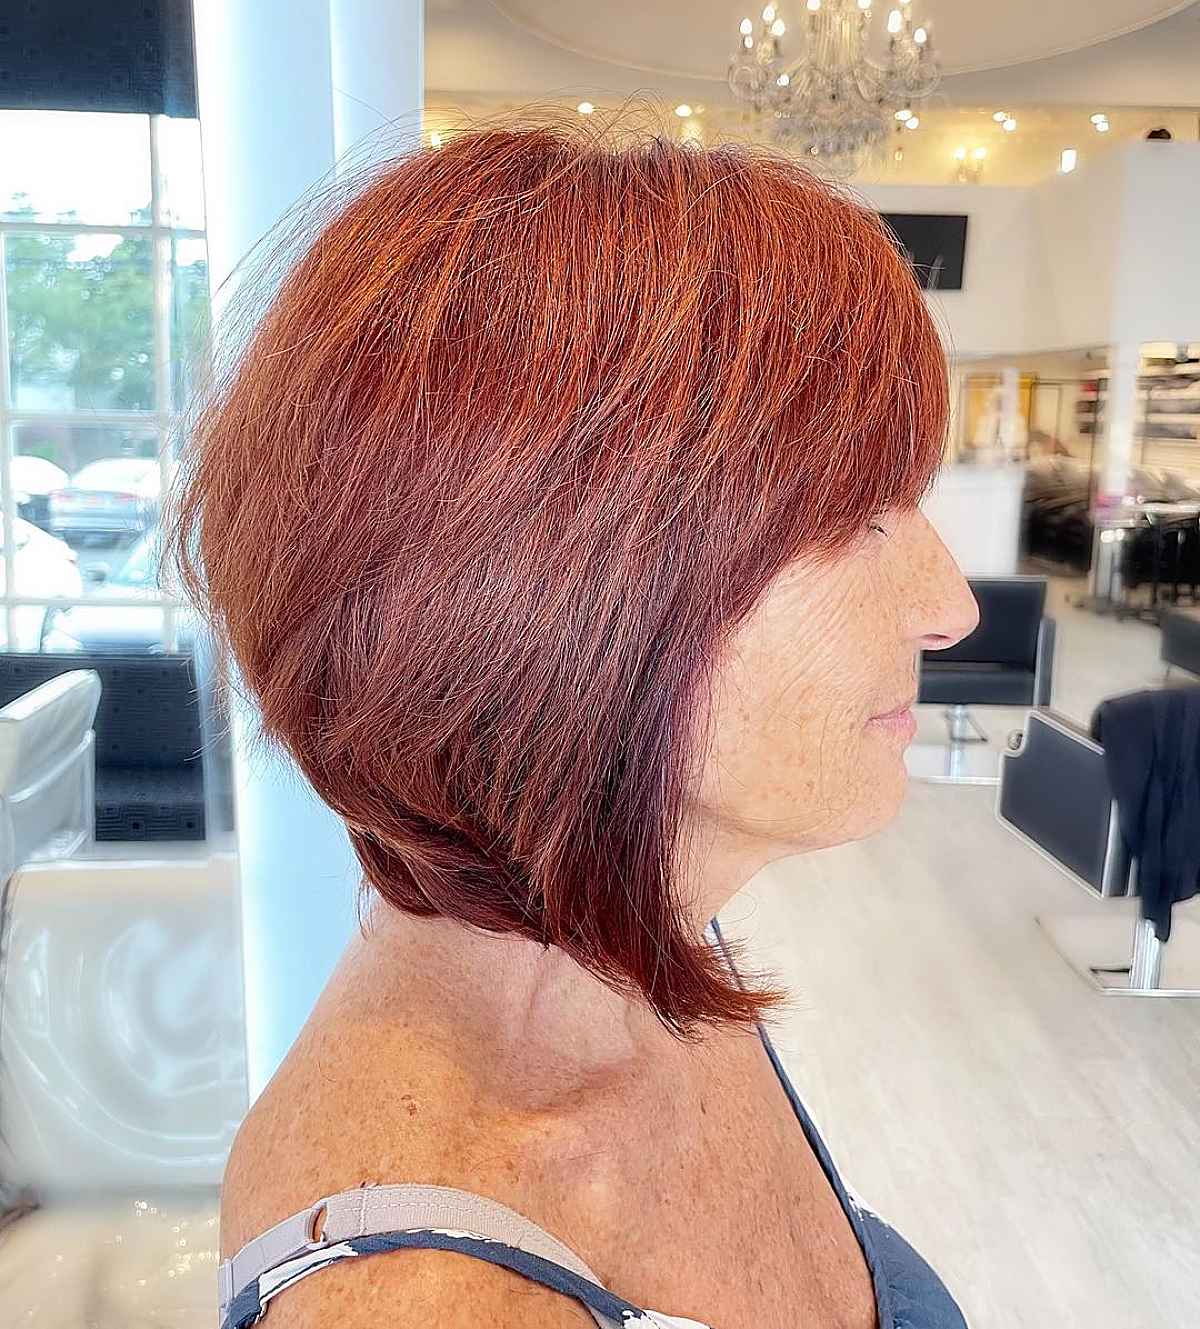 Top 15 Fall Hair Colors for Women Over 50 in 2021